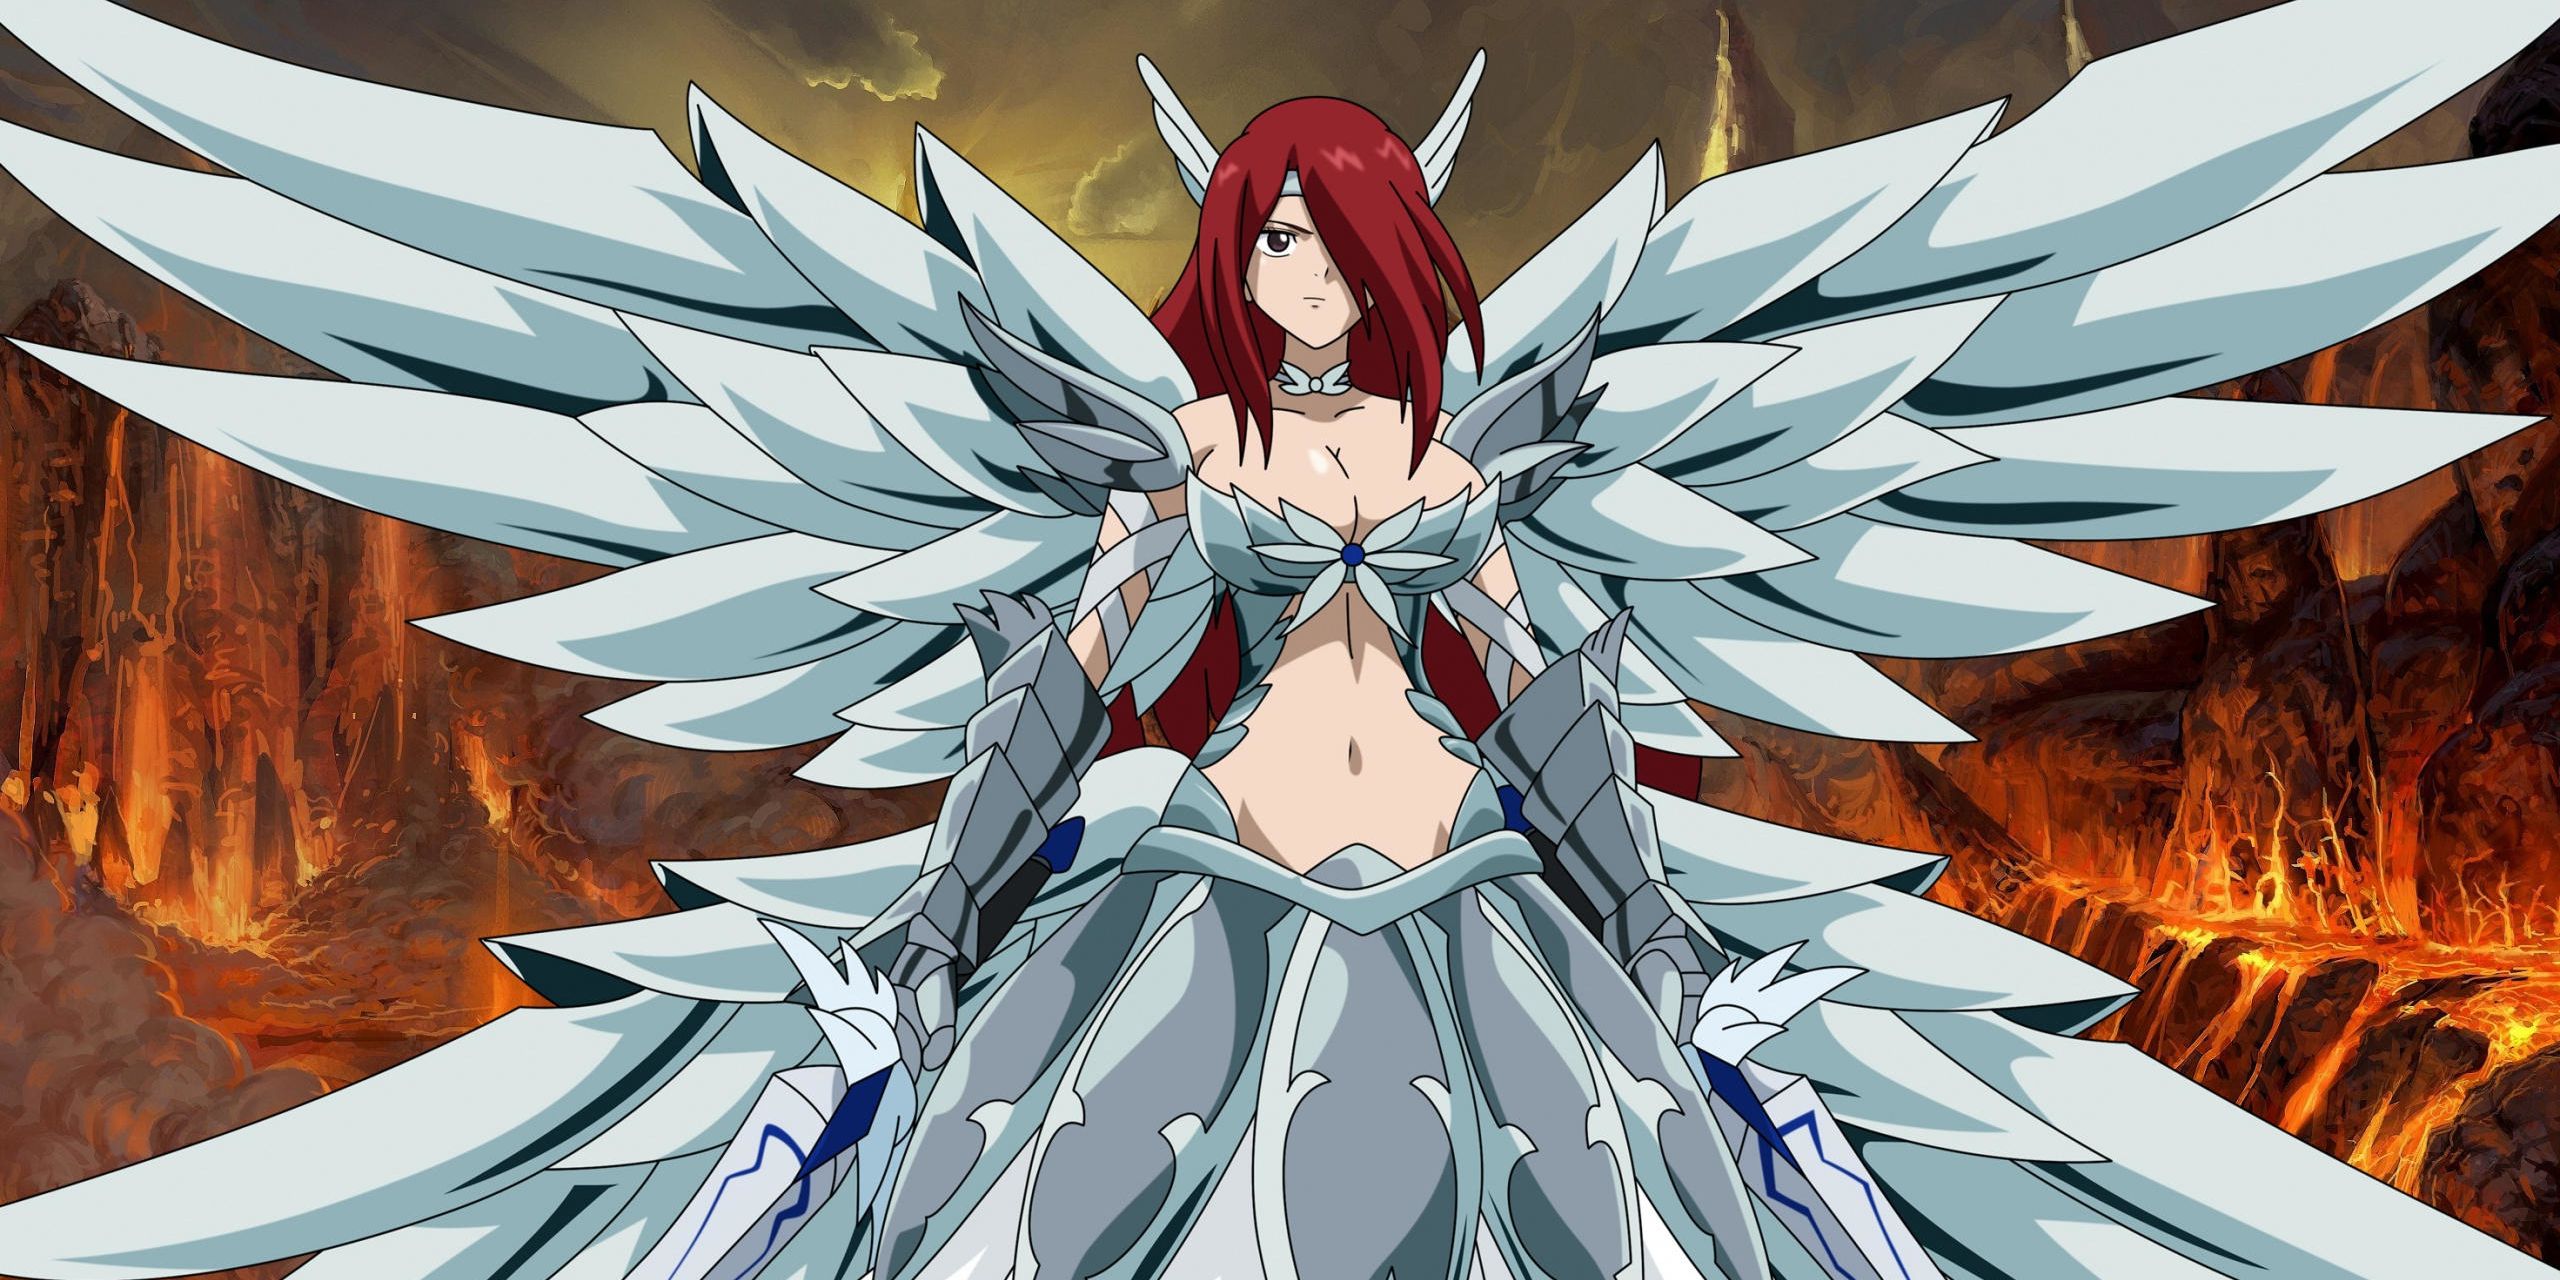 Erza Scarlet from Fairy Tail with wings and sword standing in front of lava